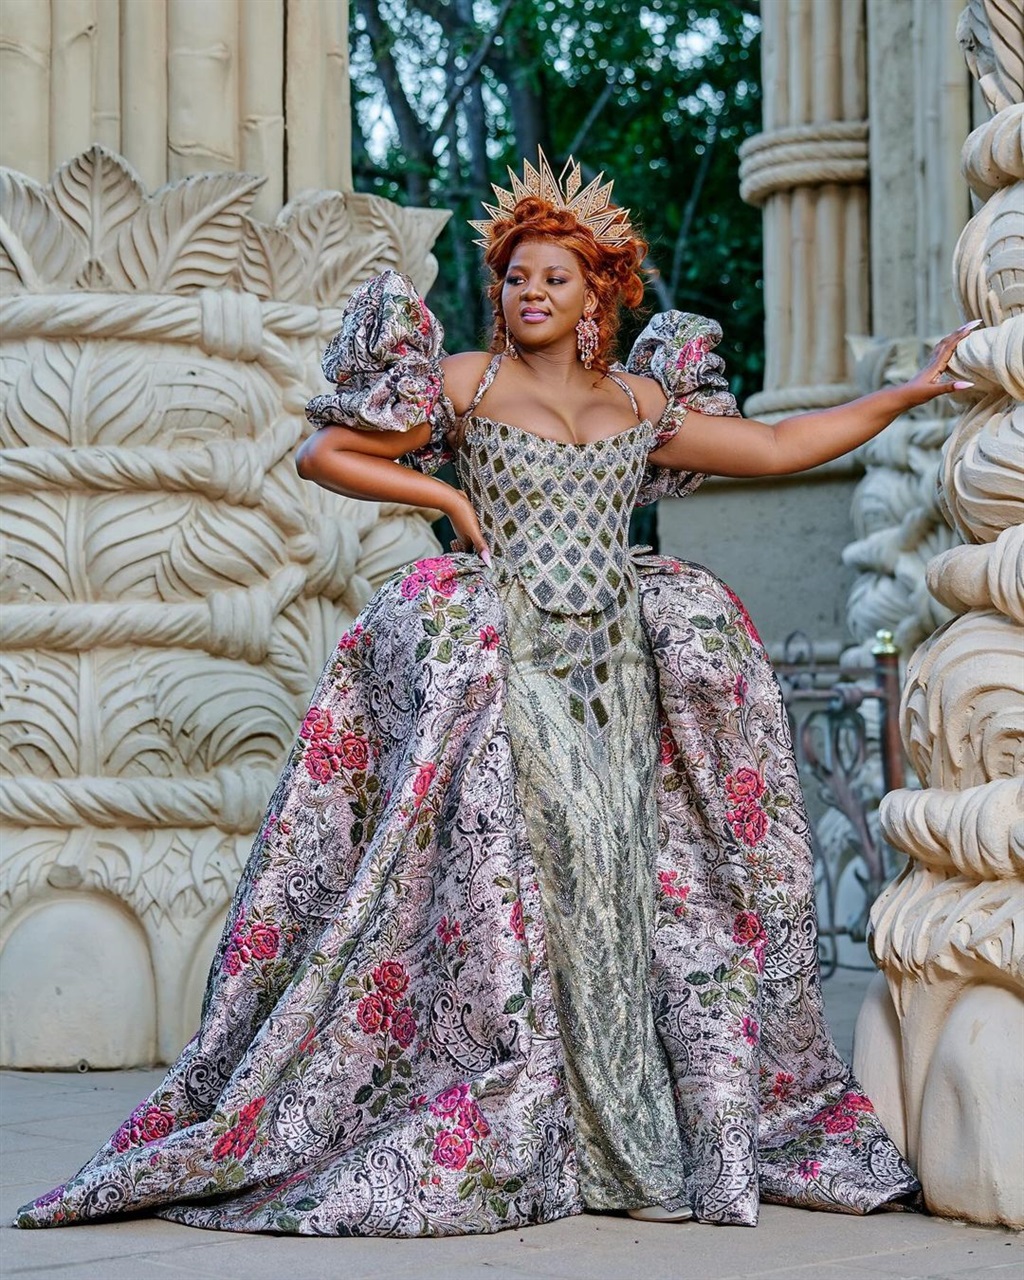 Royal AM's Shauwn Mkhize hosted a regal ball at Sun City on the latest episode of the "KwaMam'Mkhize", the second season of her reality TV show. 